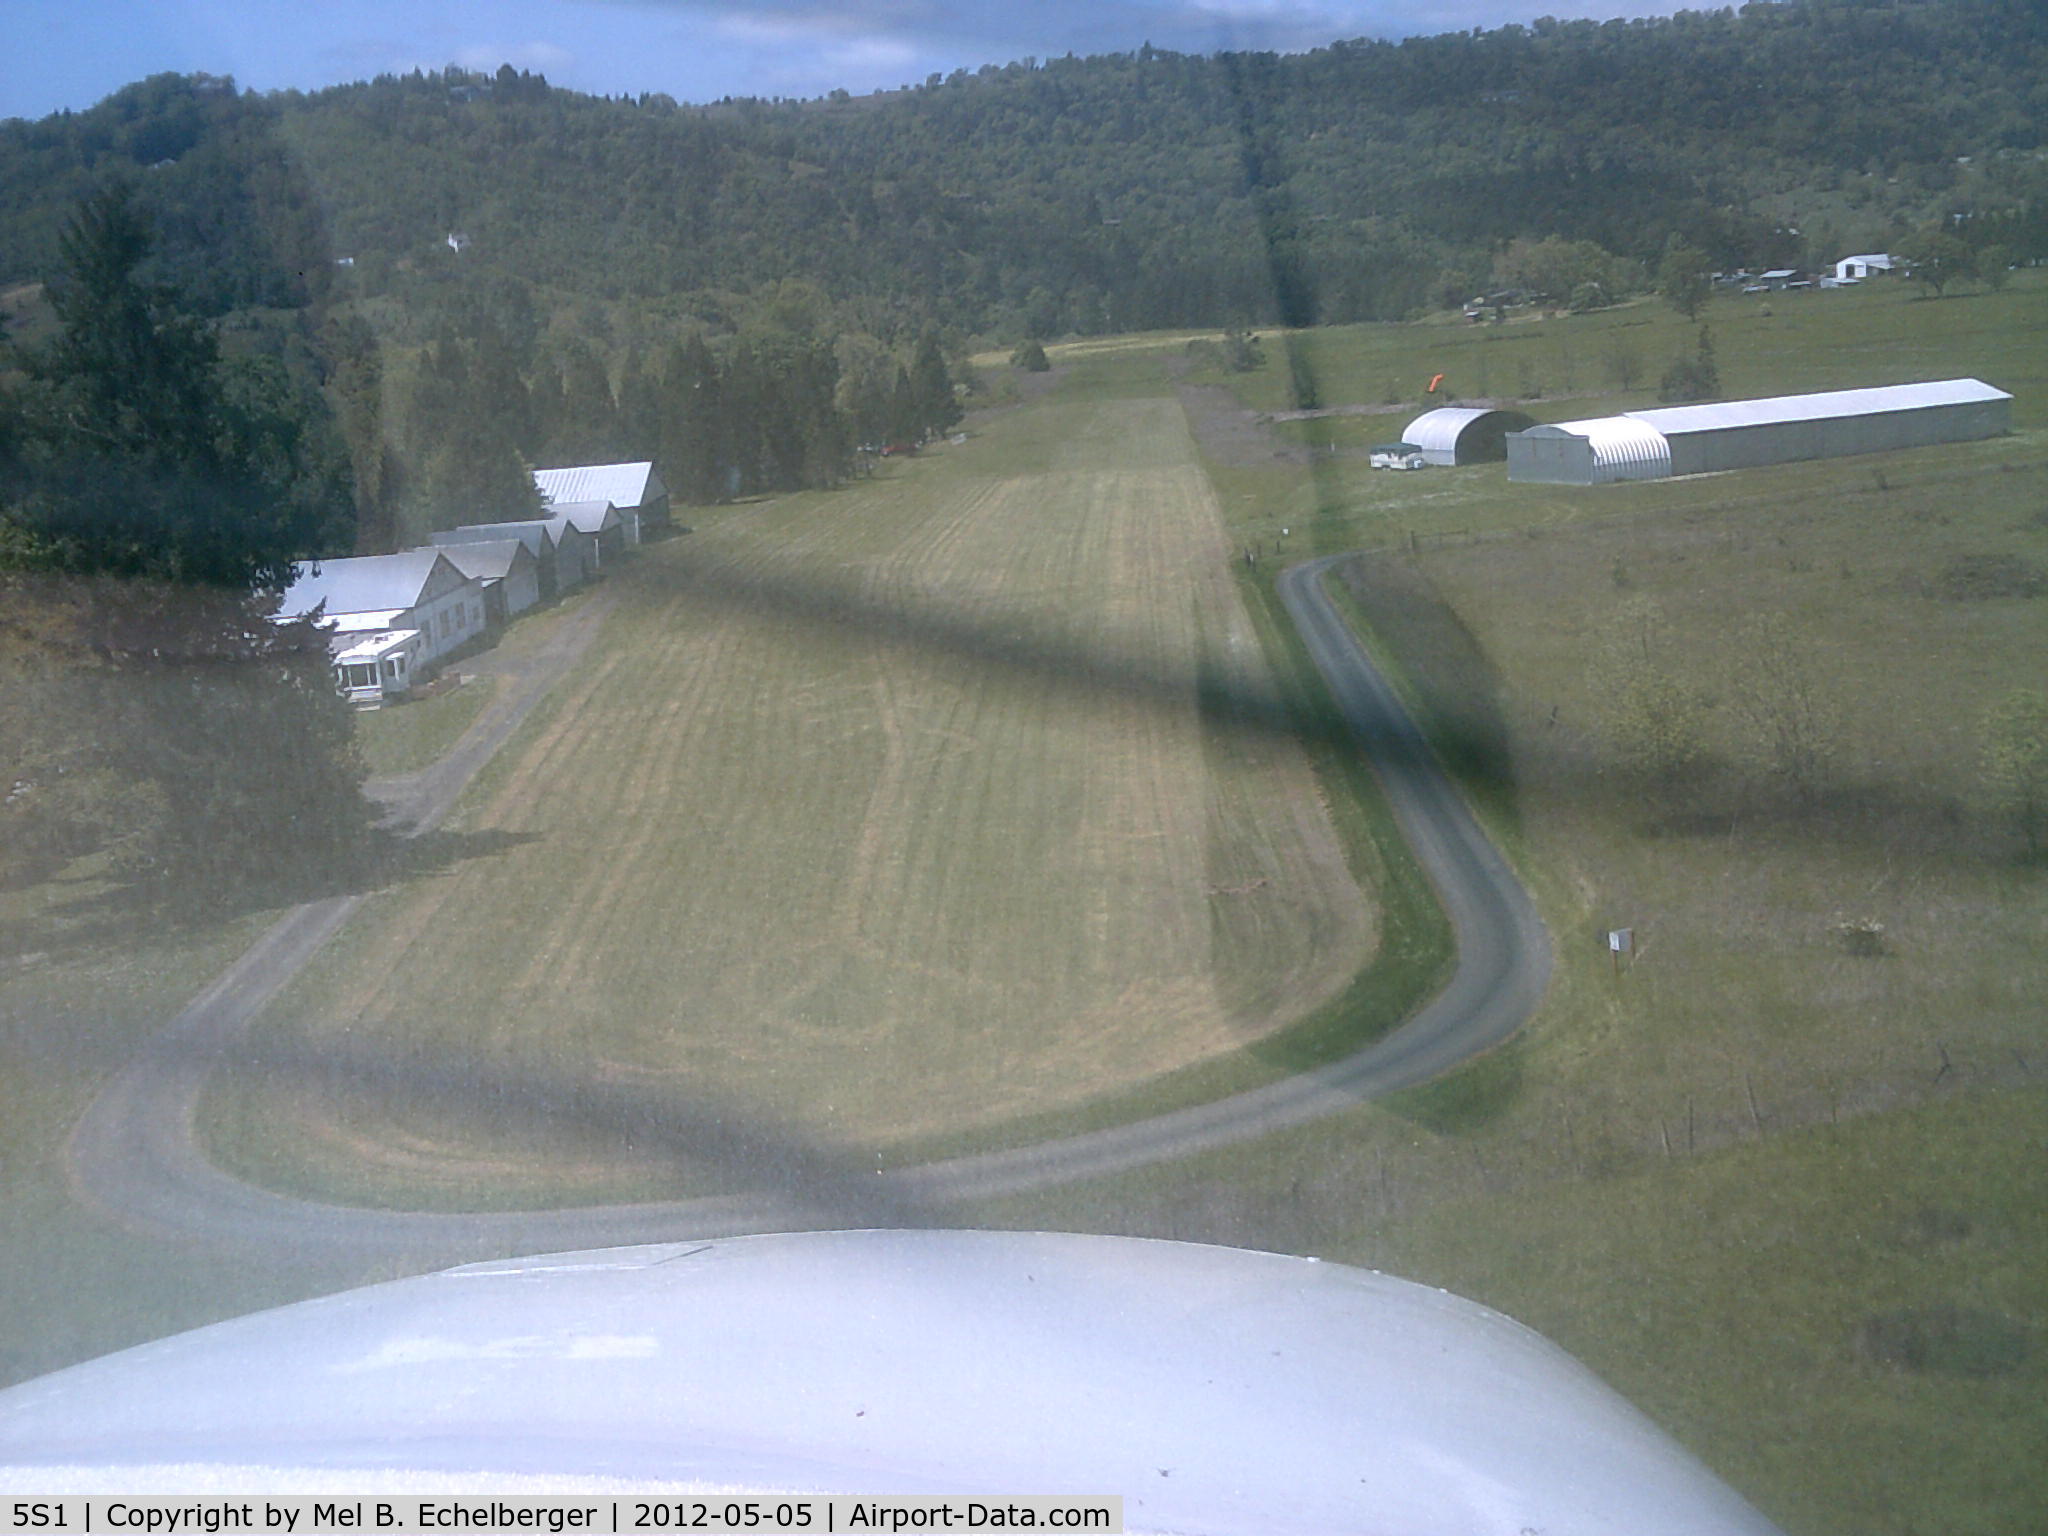 George Felt Airport (5S1) - On final rwy 28, info, monitor 122.8 Roseburg Muni, info on fld hanger says use 122.8, the published on charts and Flight Guide said 122.9. West end of 28 (10) is un-mowed and marshy..... RC Flying Club uses field regularly.